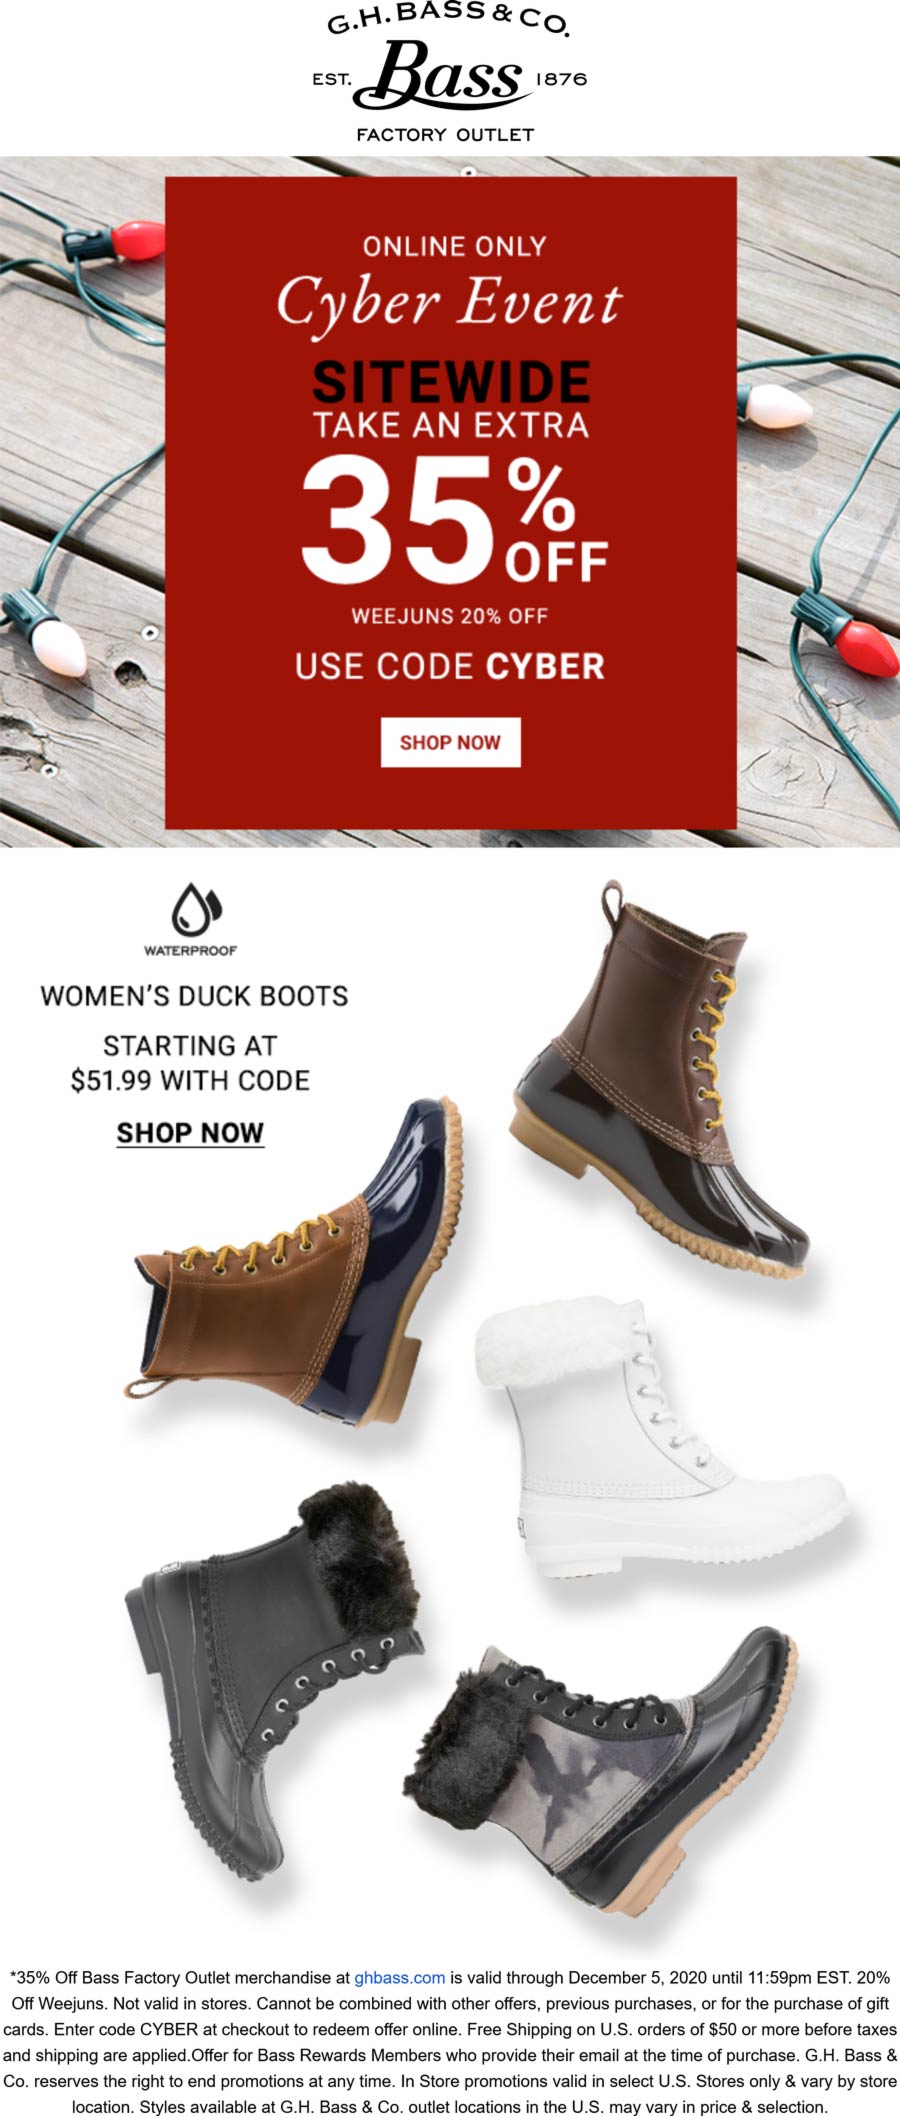 G.H. Bass & Co. Factory Outlet stores Coupon  Extra 35% off at G.H. Bass & Co. Factory Outlet via promo code CYBER #ghbasscofactoryoutlet 